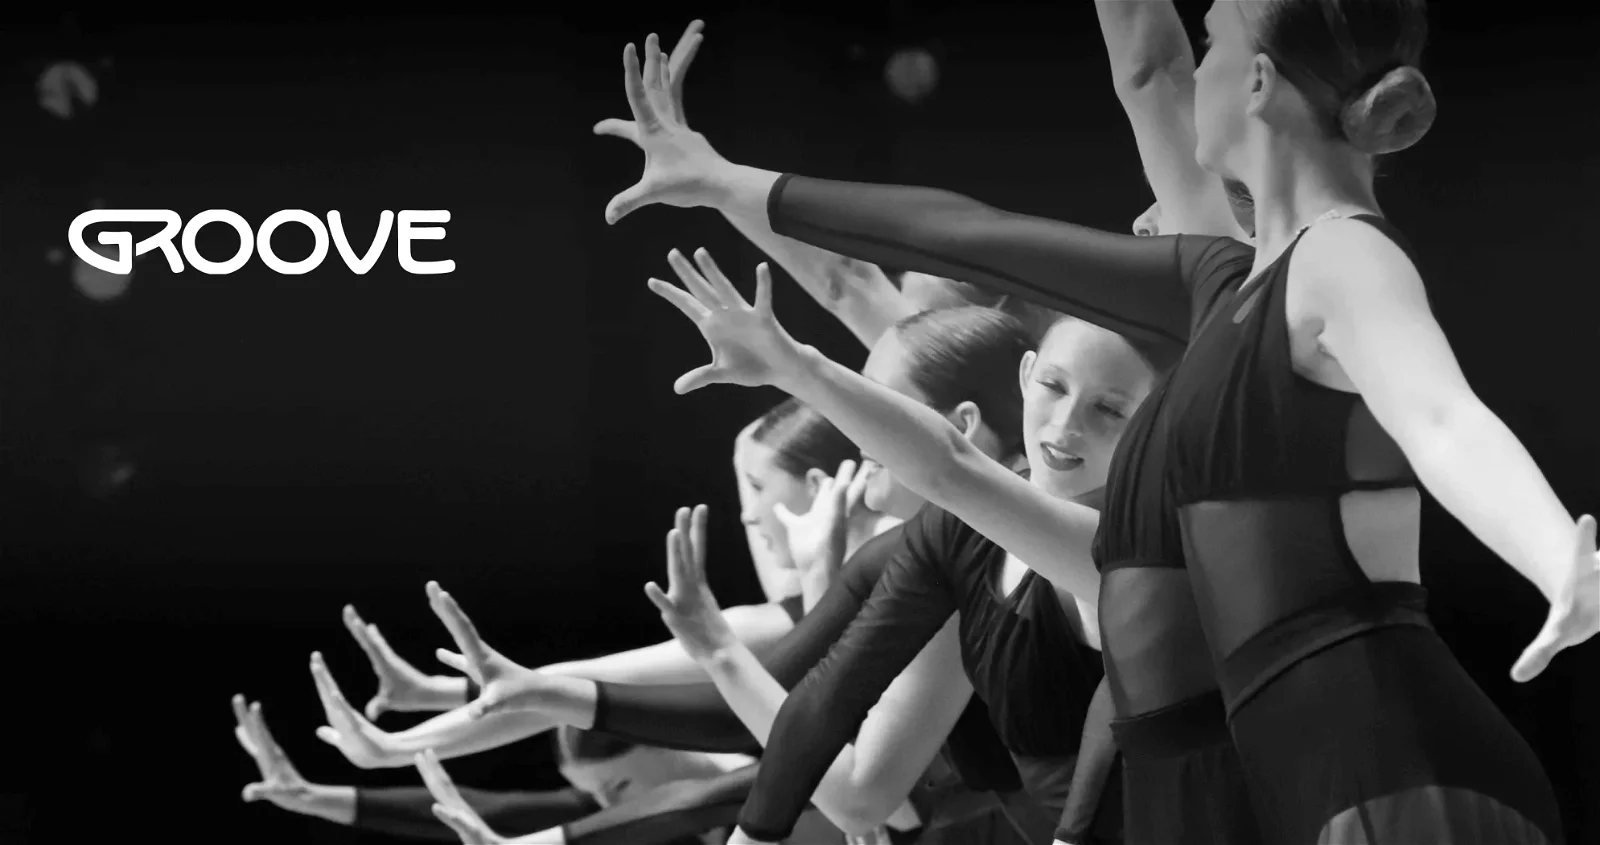 Groove Dance Competition case study image